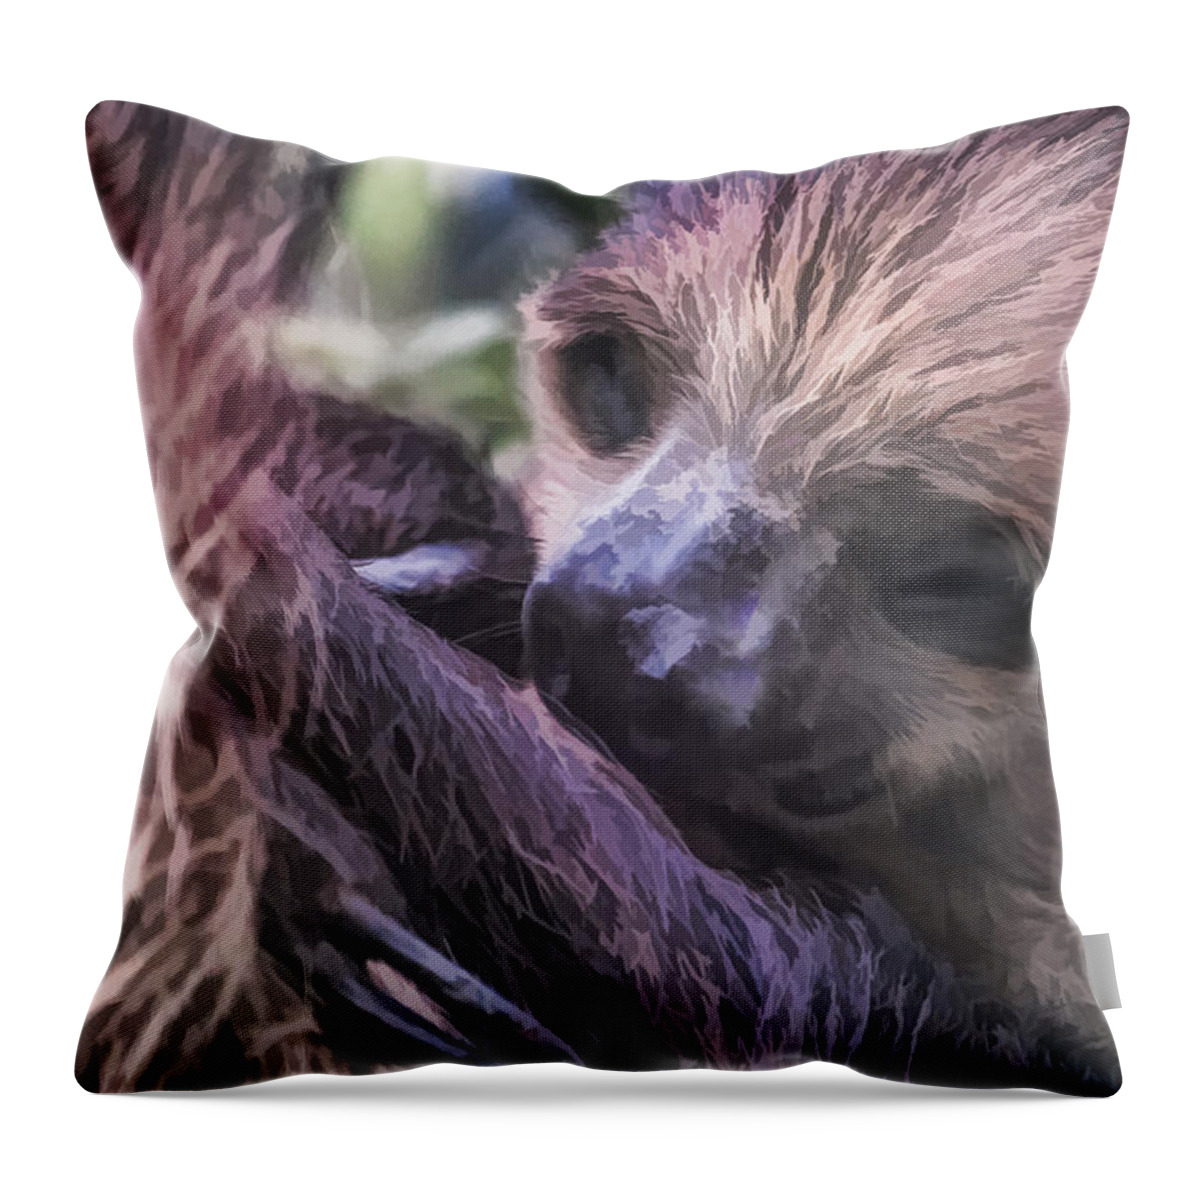 Animal Throw Pillow featuring the digital art Baby Sloth by Ray Shiu